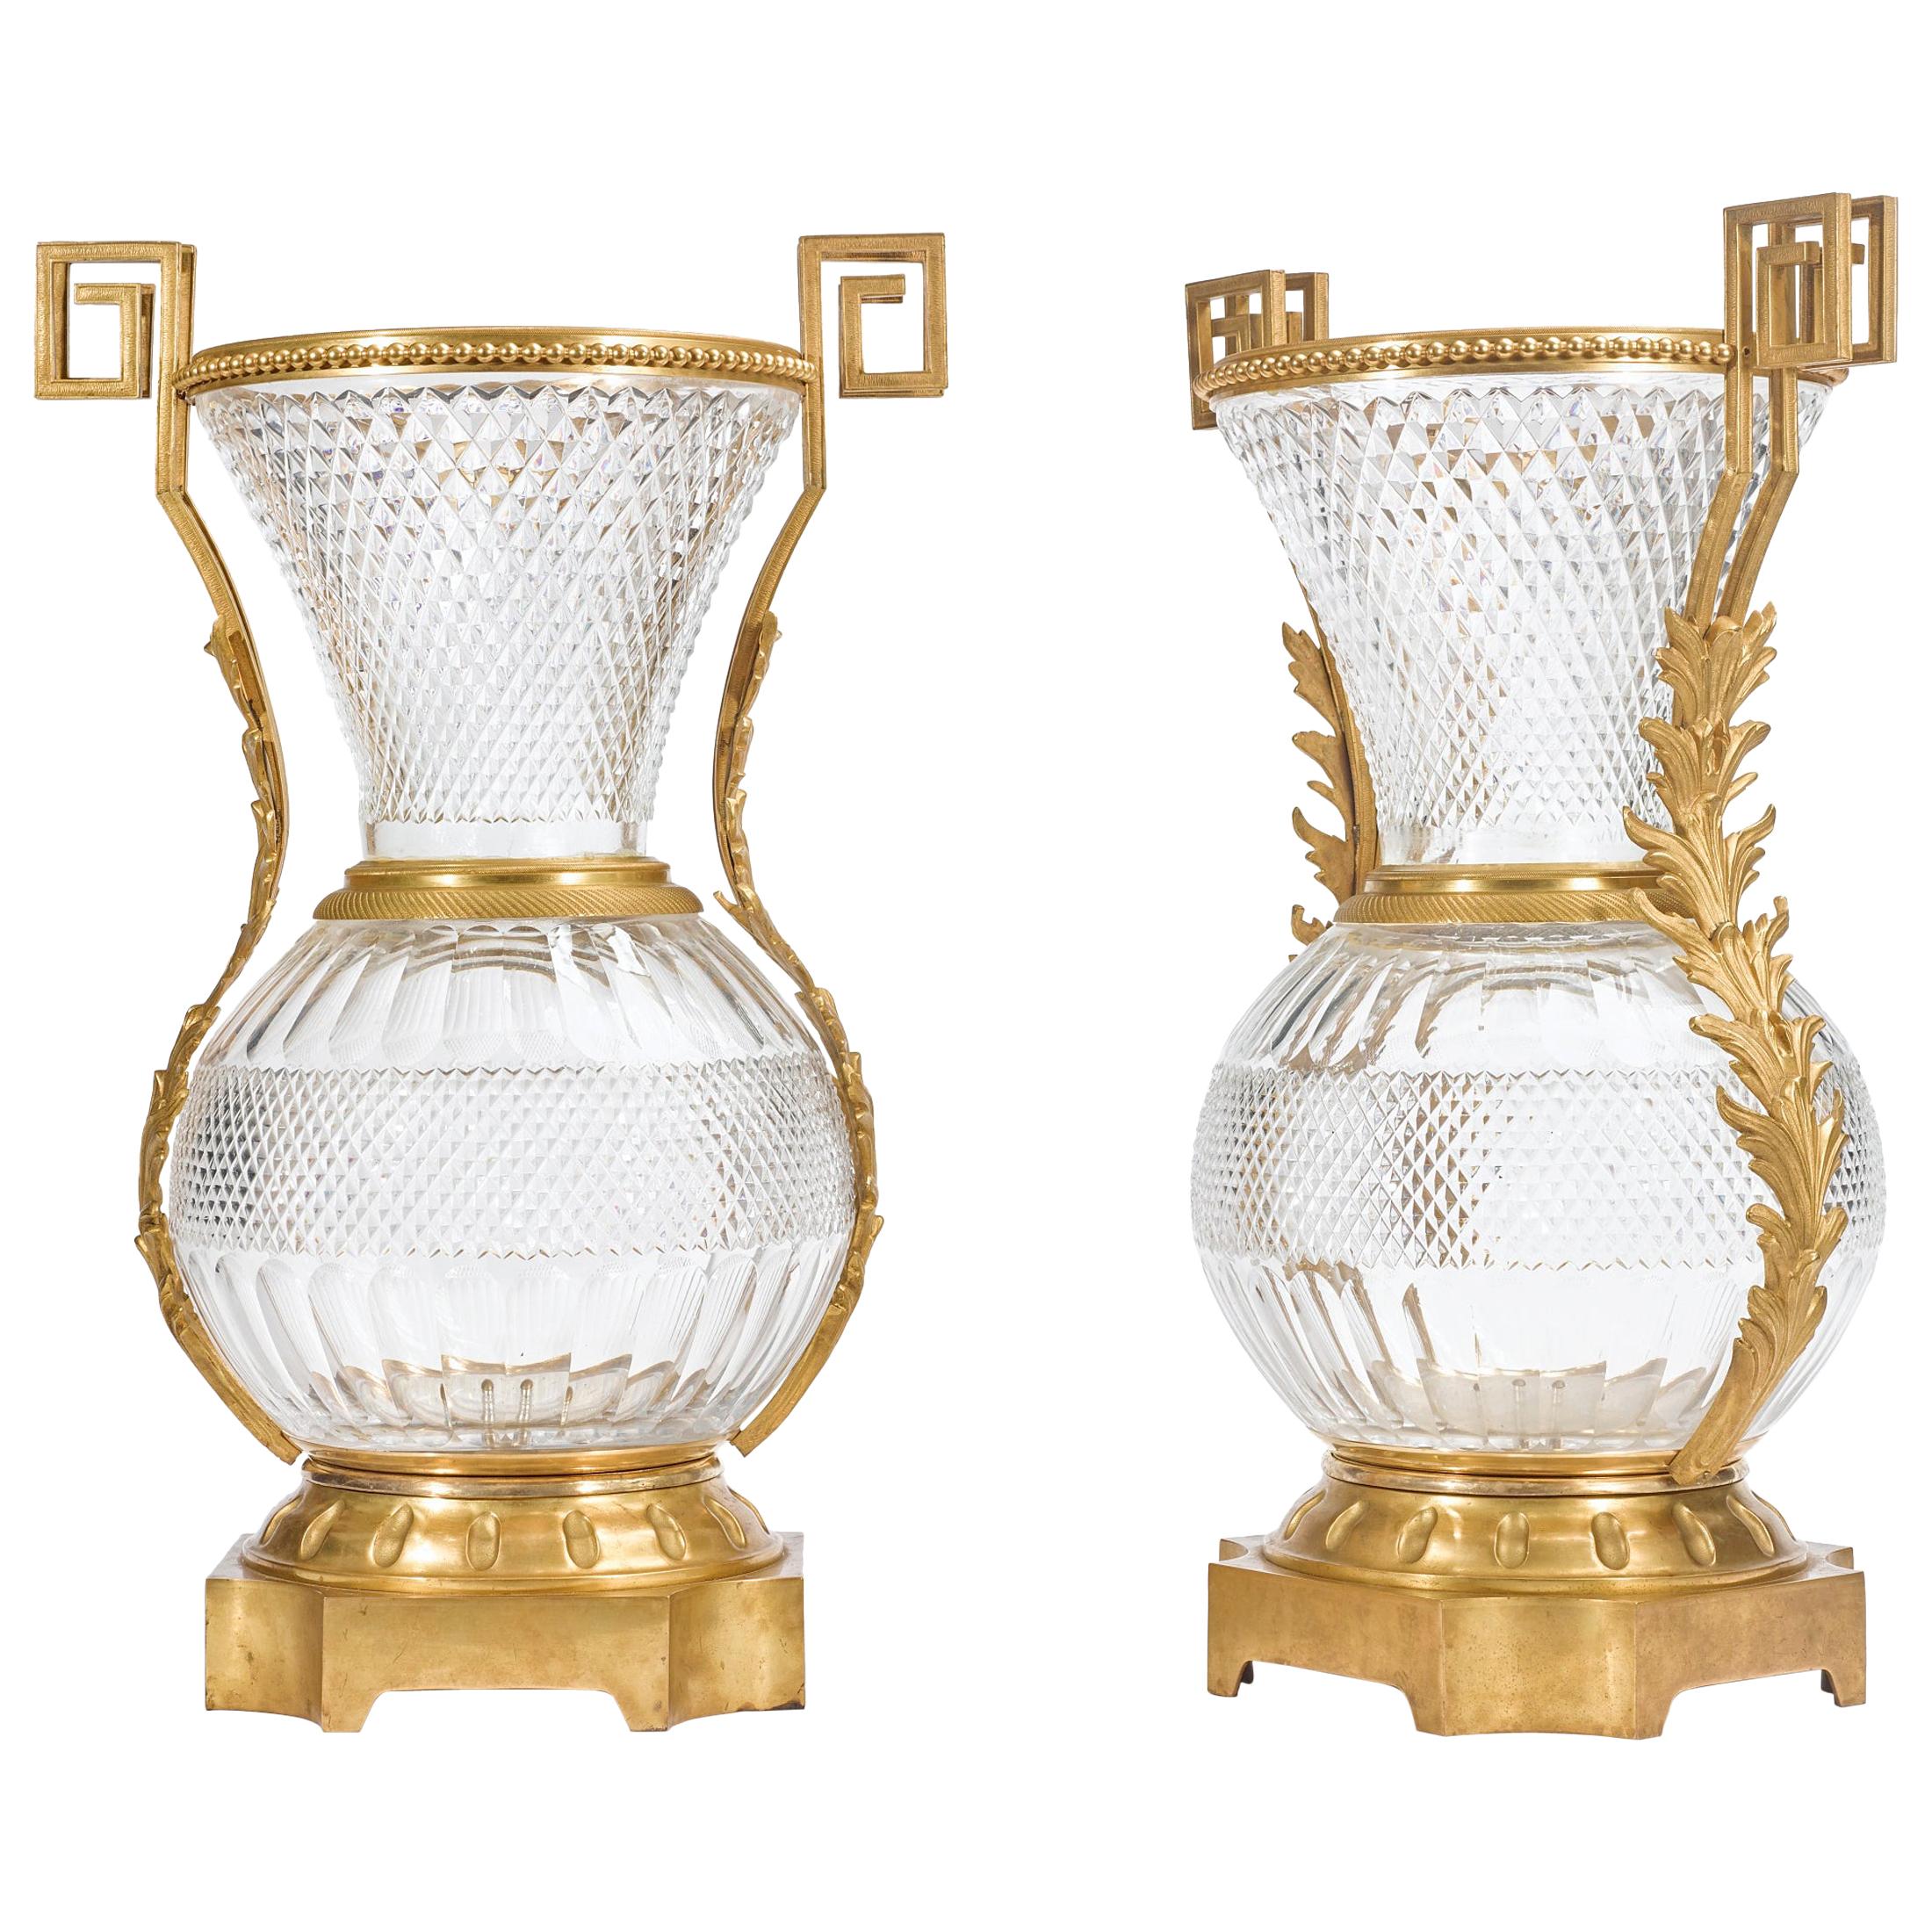 Early 20th Century Pair of Monumental French Ormolu-Mounted Cut Crystal Vases For Sale